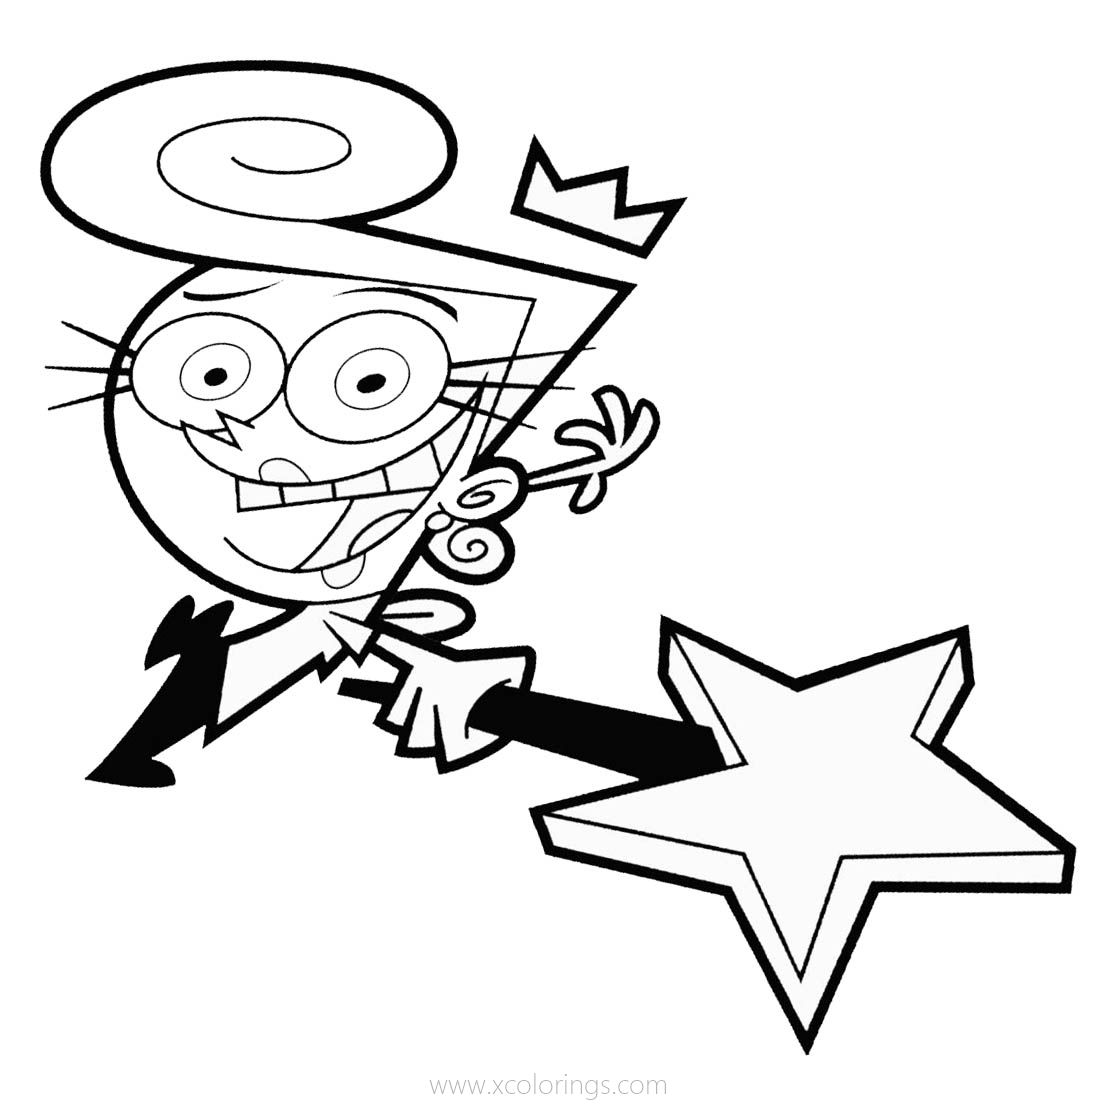 Free Fairly Odd Parents Coloring Pages Wanda printable